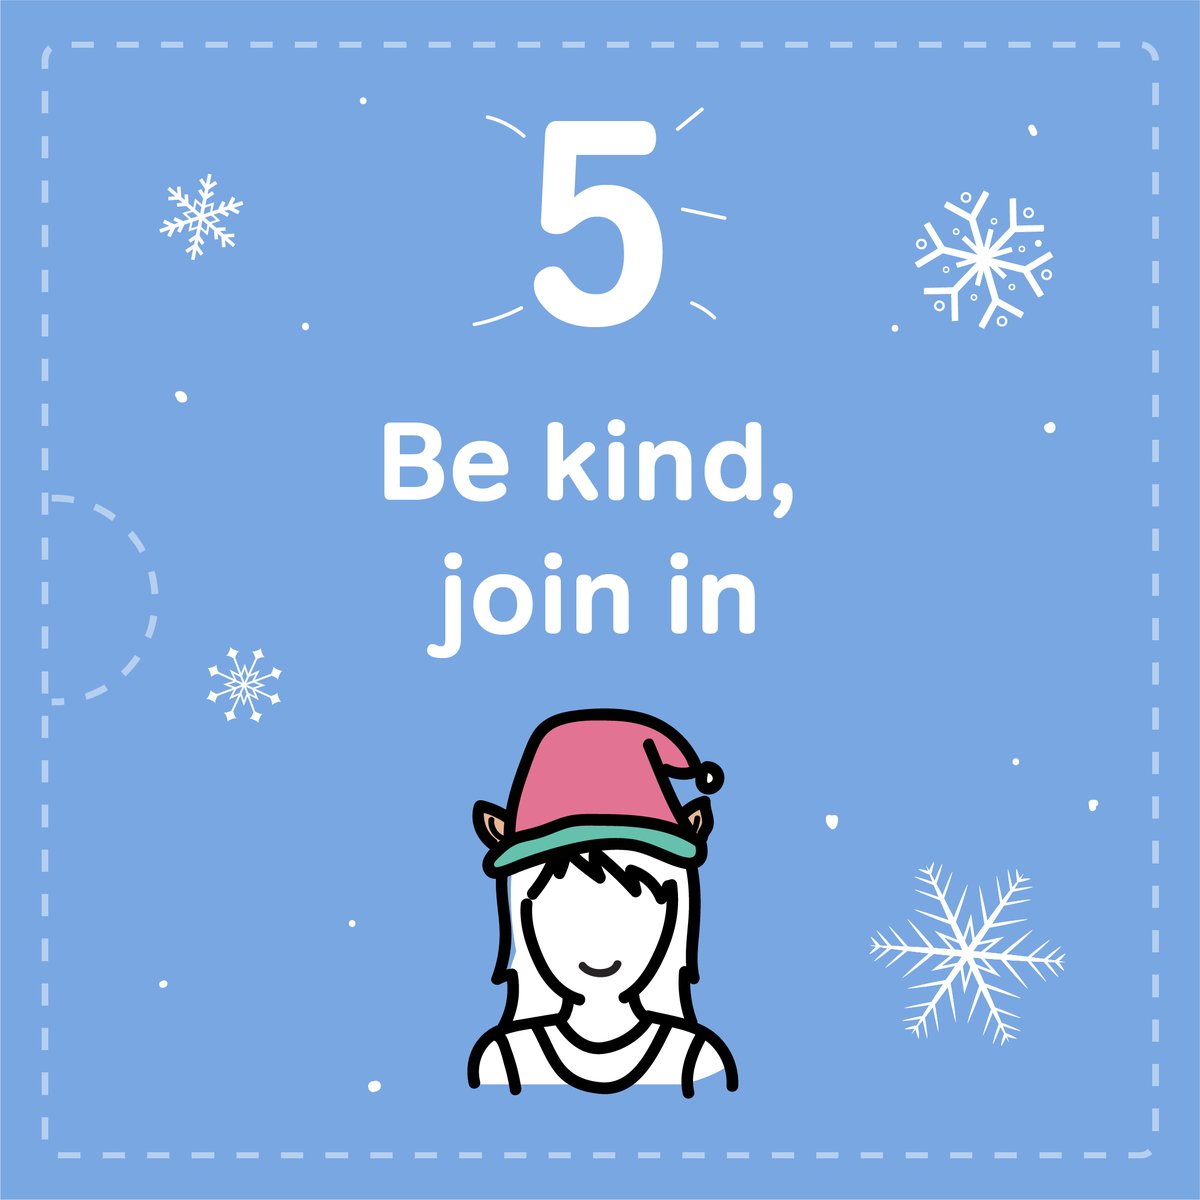 Be a volunteer, a helper or a good neighbour this festive season - helping out in any way we can manage can be good for our #wellbeing. Find out about local #Leeds volunteering from @VolActionLeeds: doinggoodleeds.org.uk/volunteering/ #FestiveSeasonYourWay #MindWellAdventCalendar